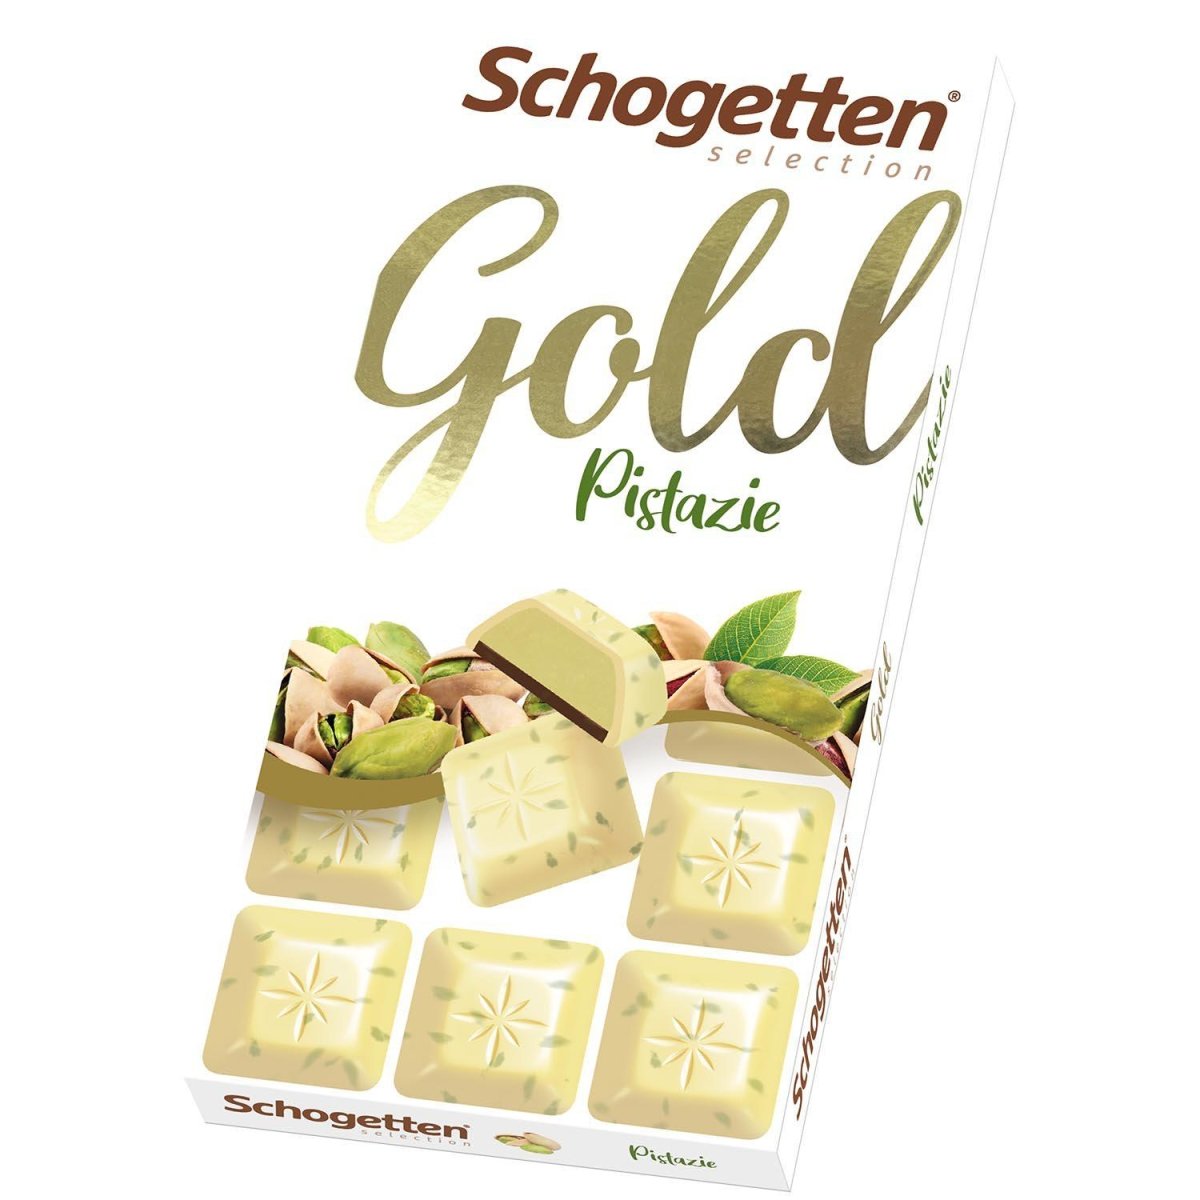 Schogetten Selection Gold Pistachio 100g - Candy Mail UK